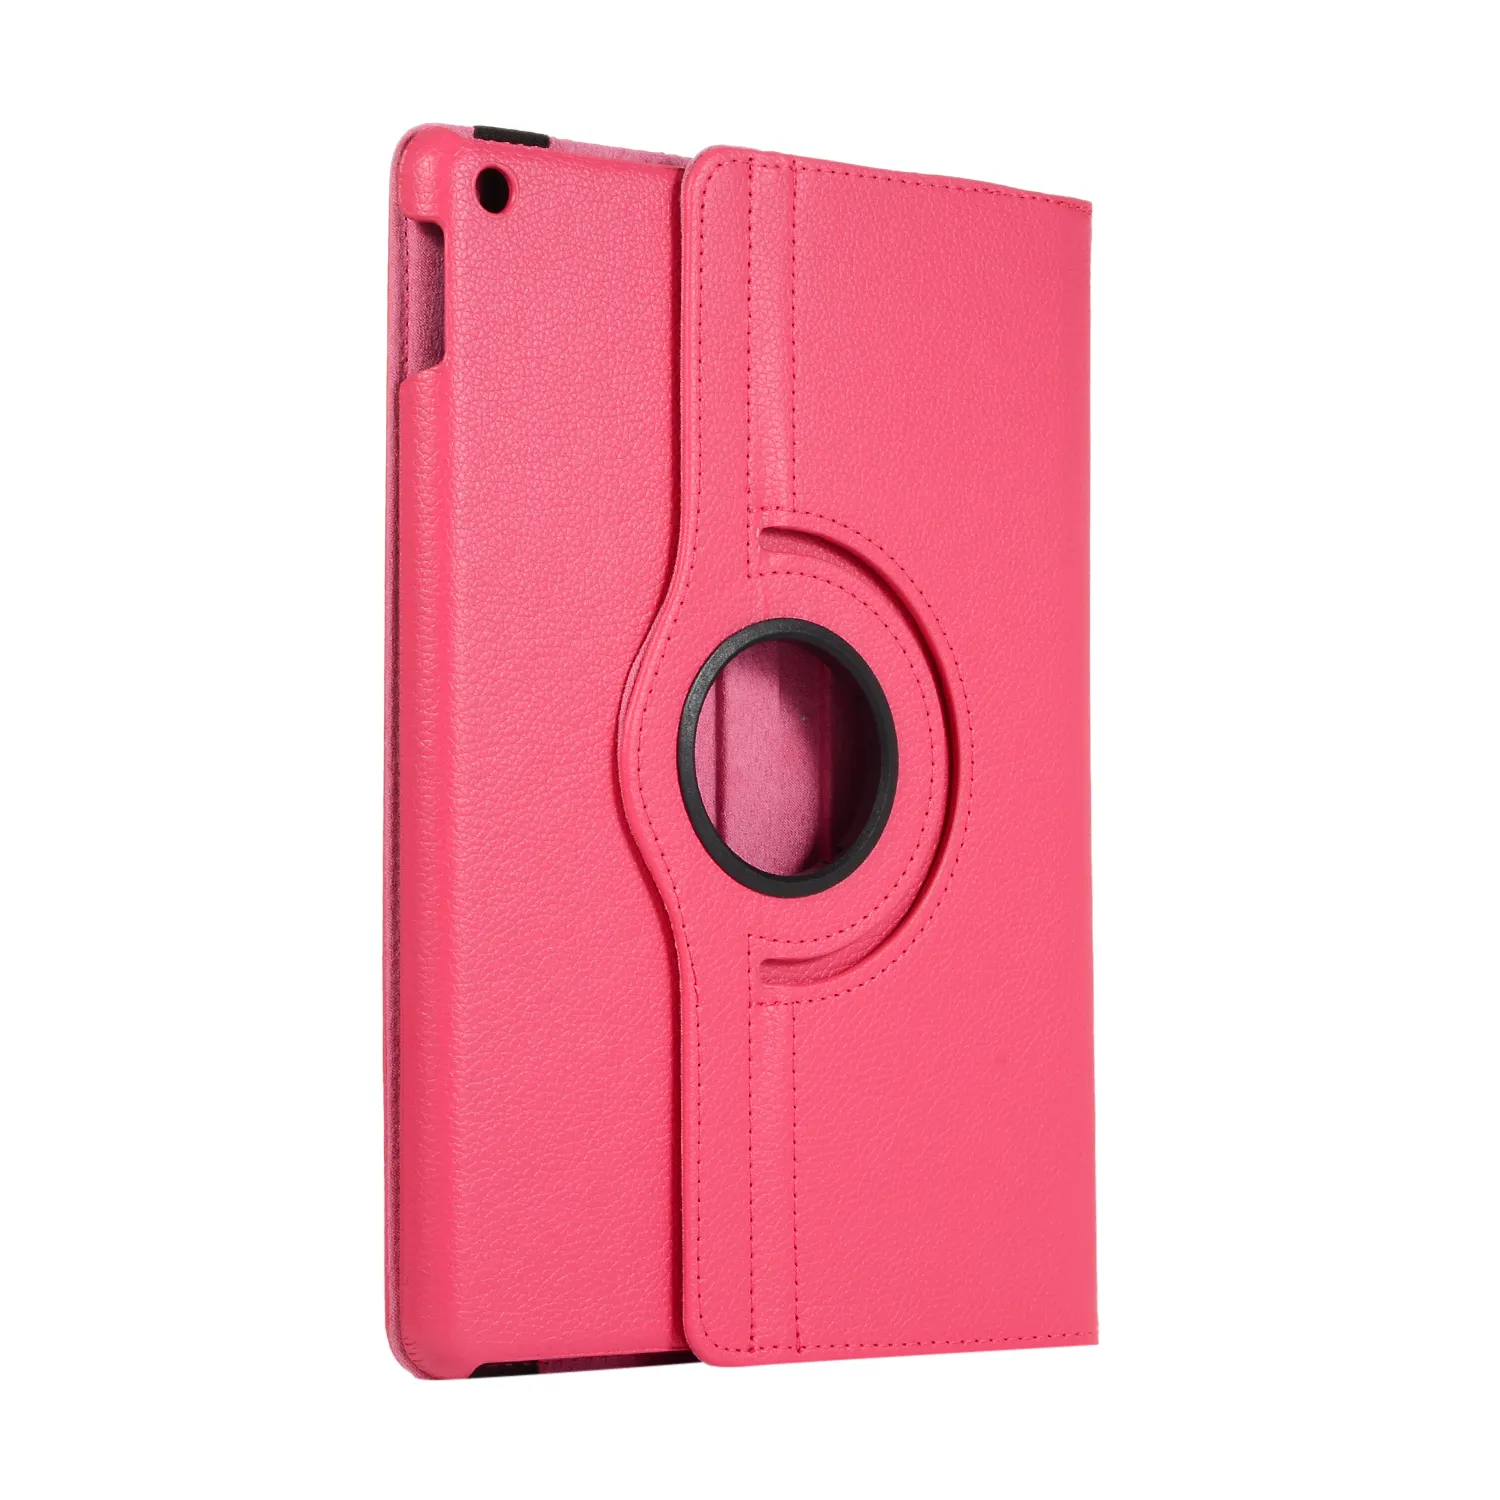 Tablet Covers Cases Rugged 360 Degree Rotating Stand PU Leather Protective Cover For Apple IPad 10.2 Case 7th 8th Gen Tablet